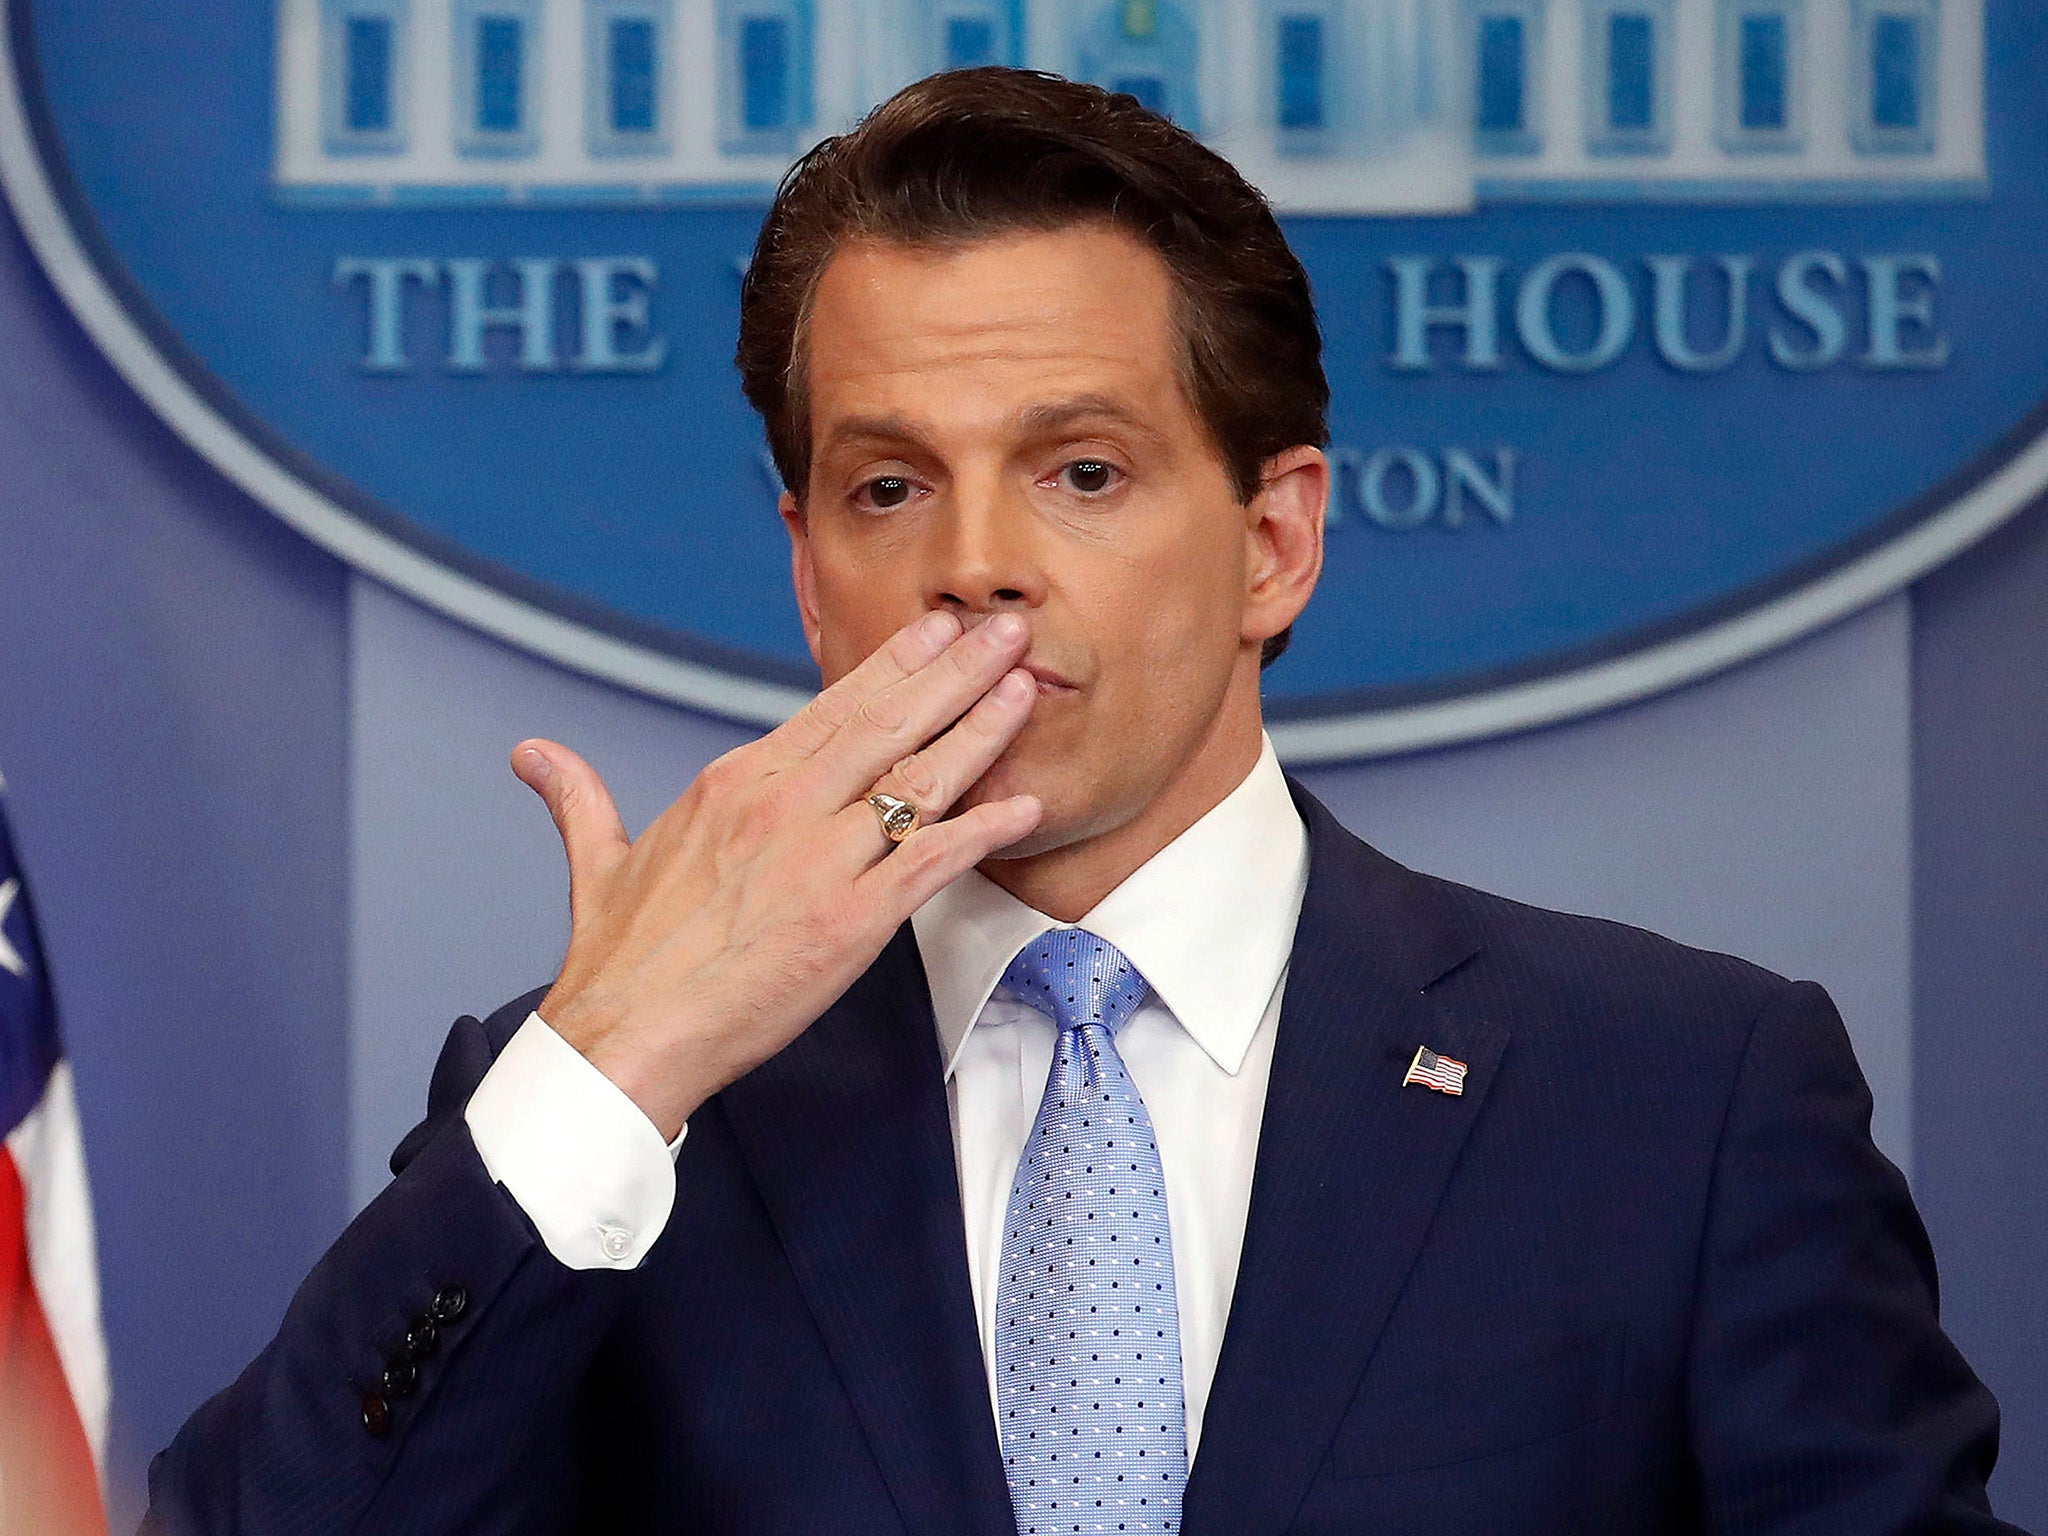 Anthony Scaramucci becomes the latest White House staffer to be fired